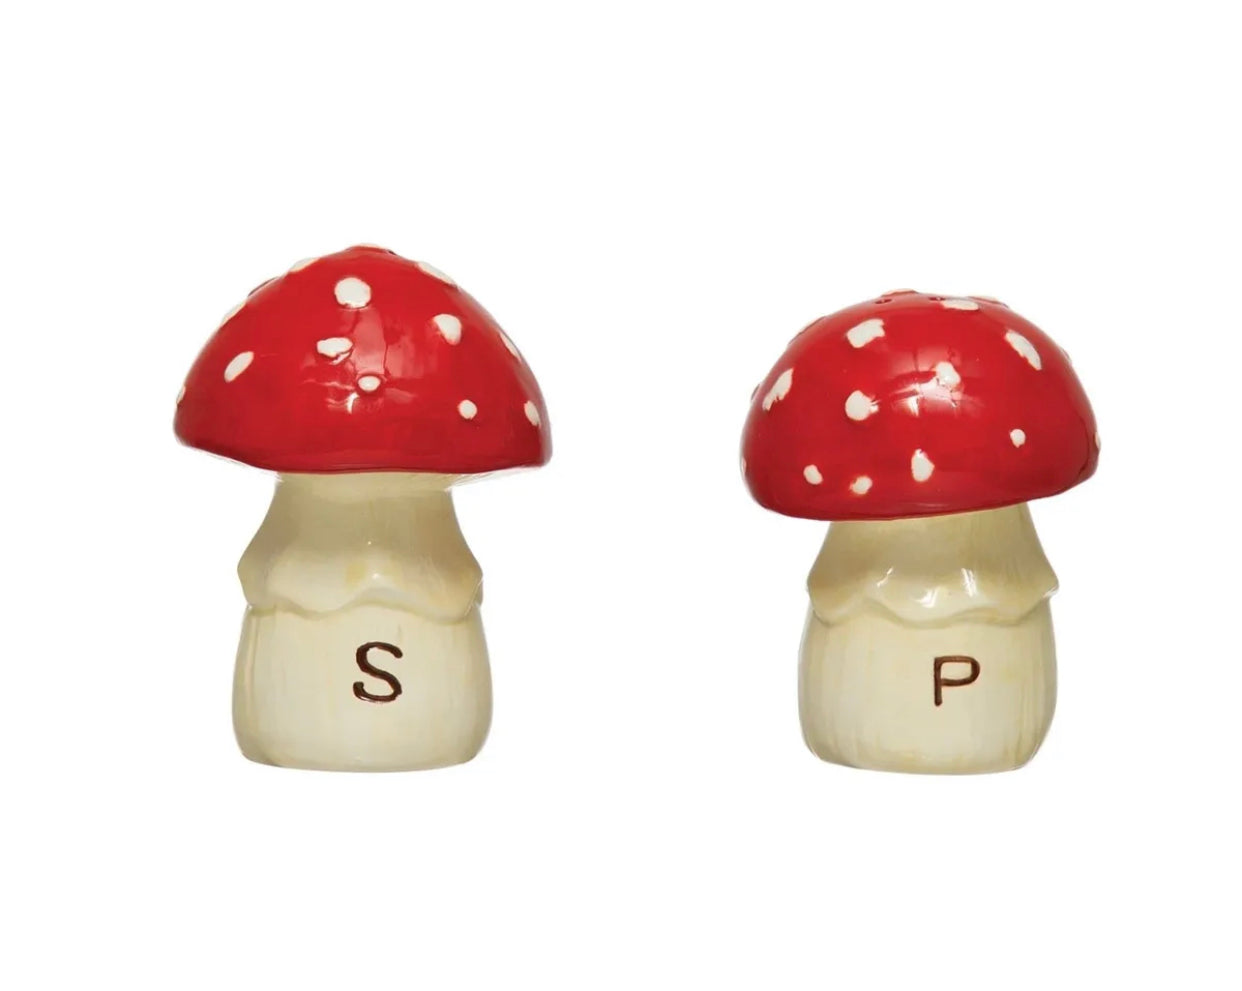 Load image into Gallery viewer, Hand-Painted Ceramic Mushroom Shaped Salt and Pepper Shakers, Set of 2
